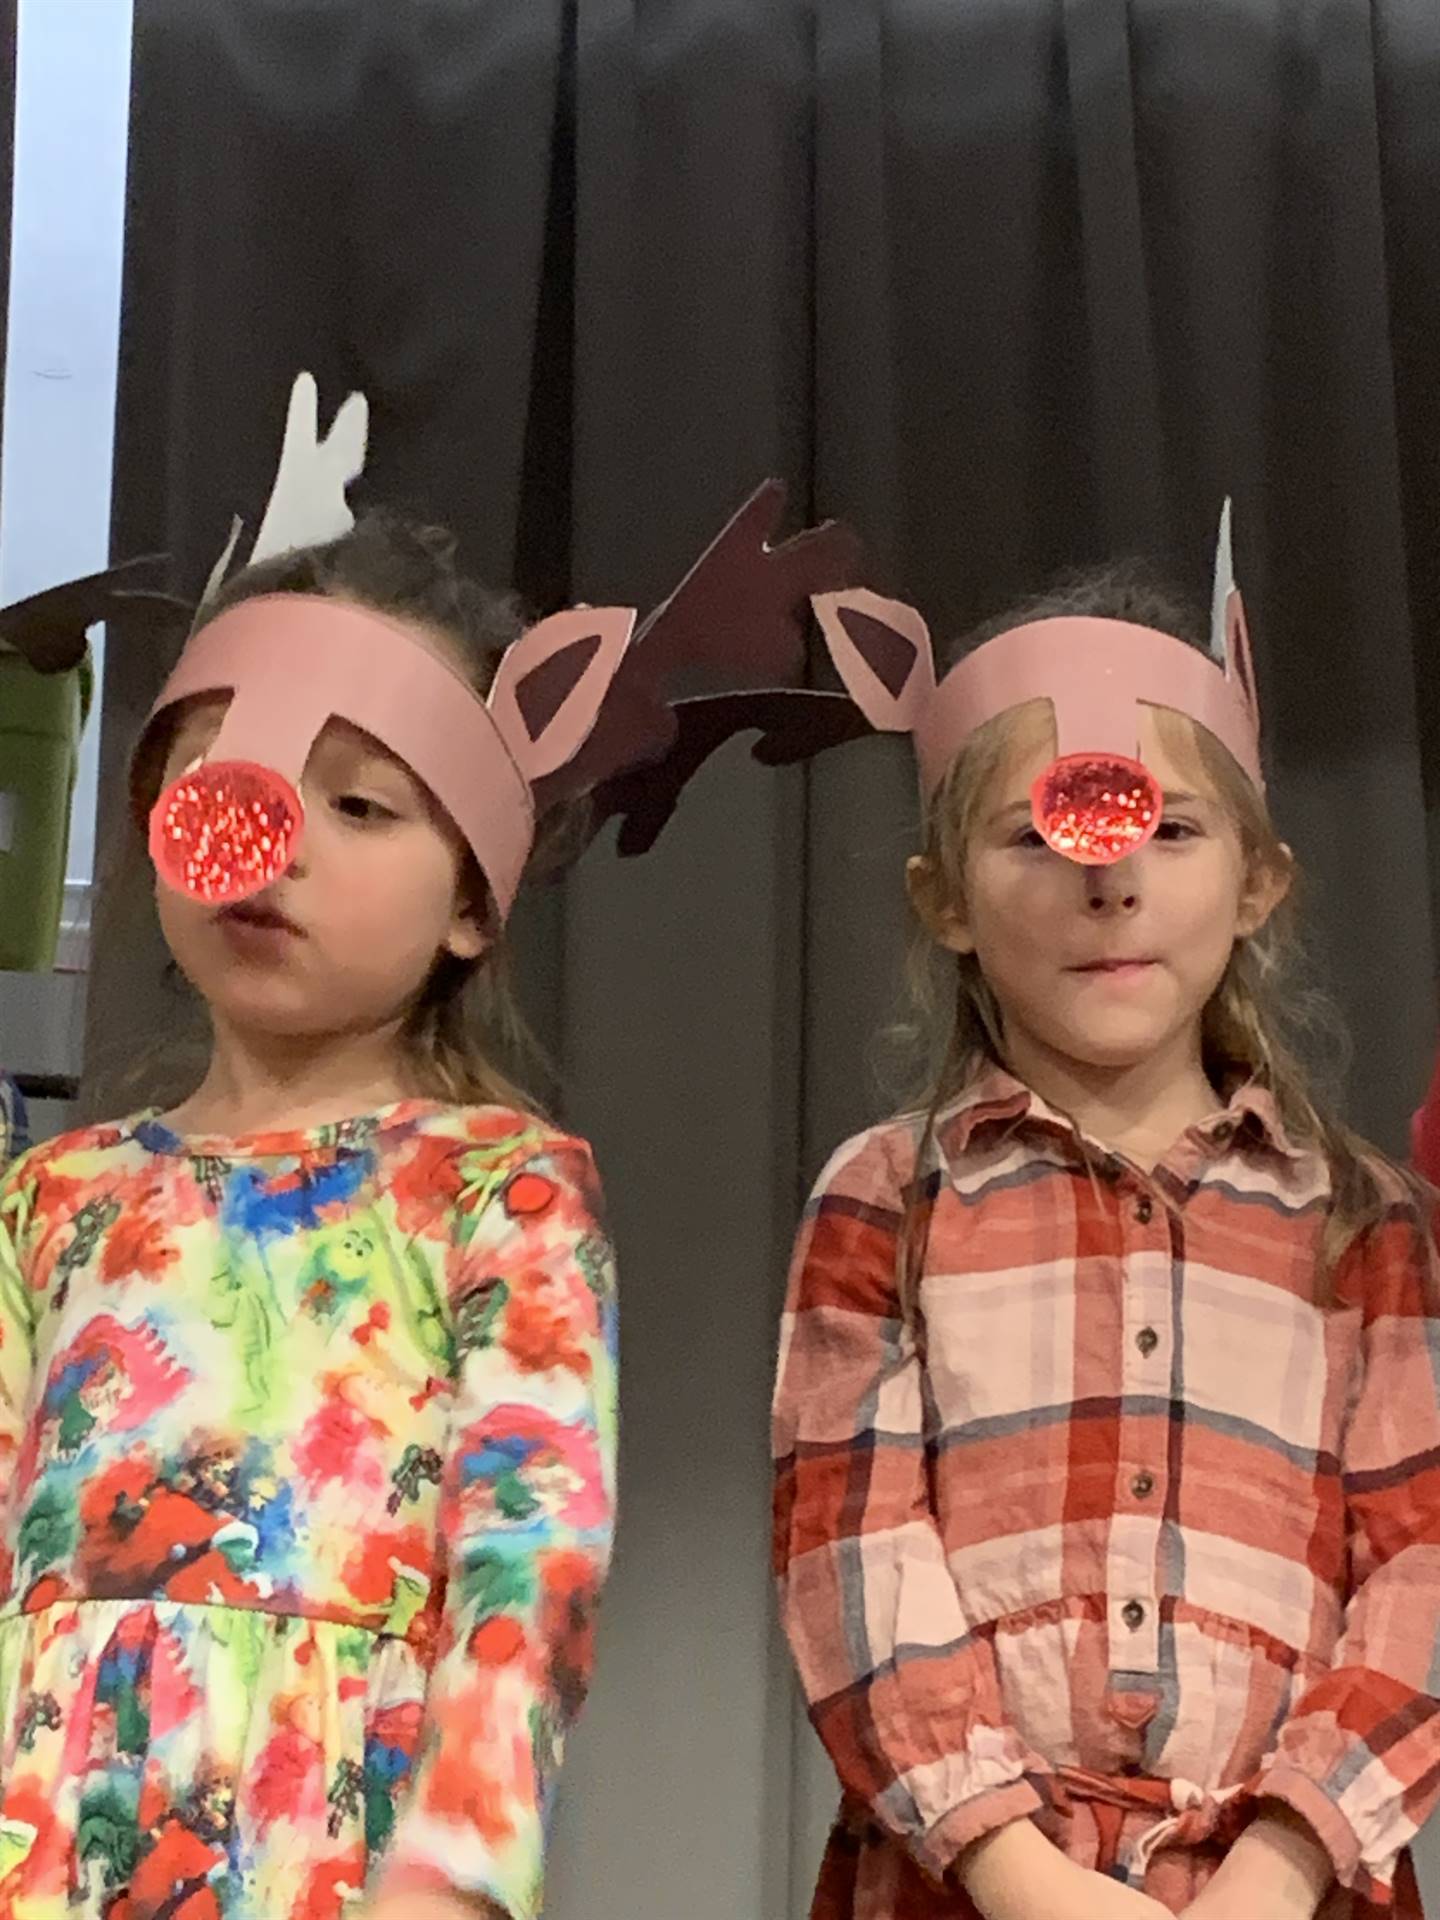 a pair of students with red noses and reindeers ears.